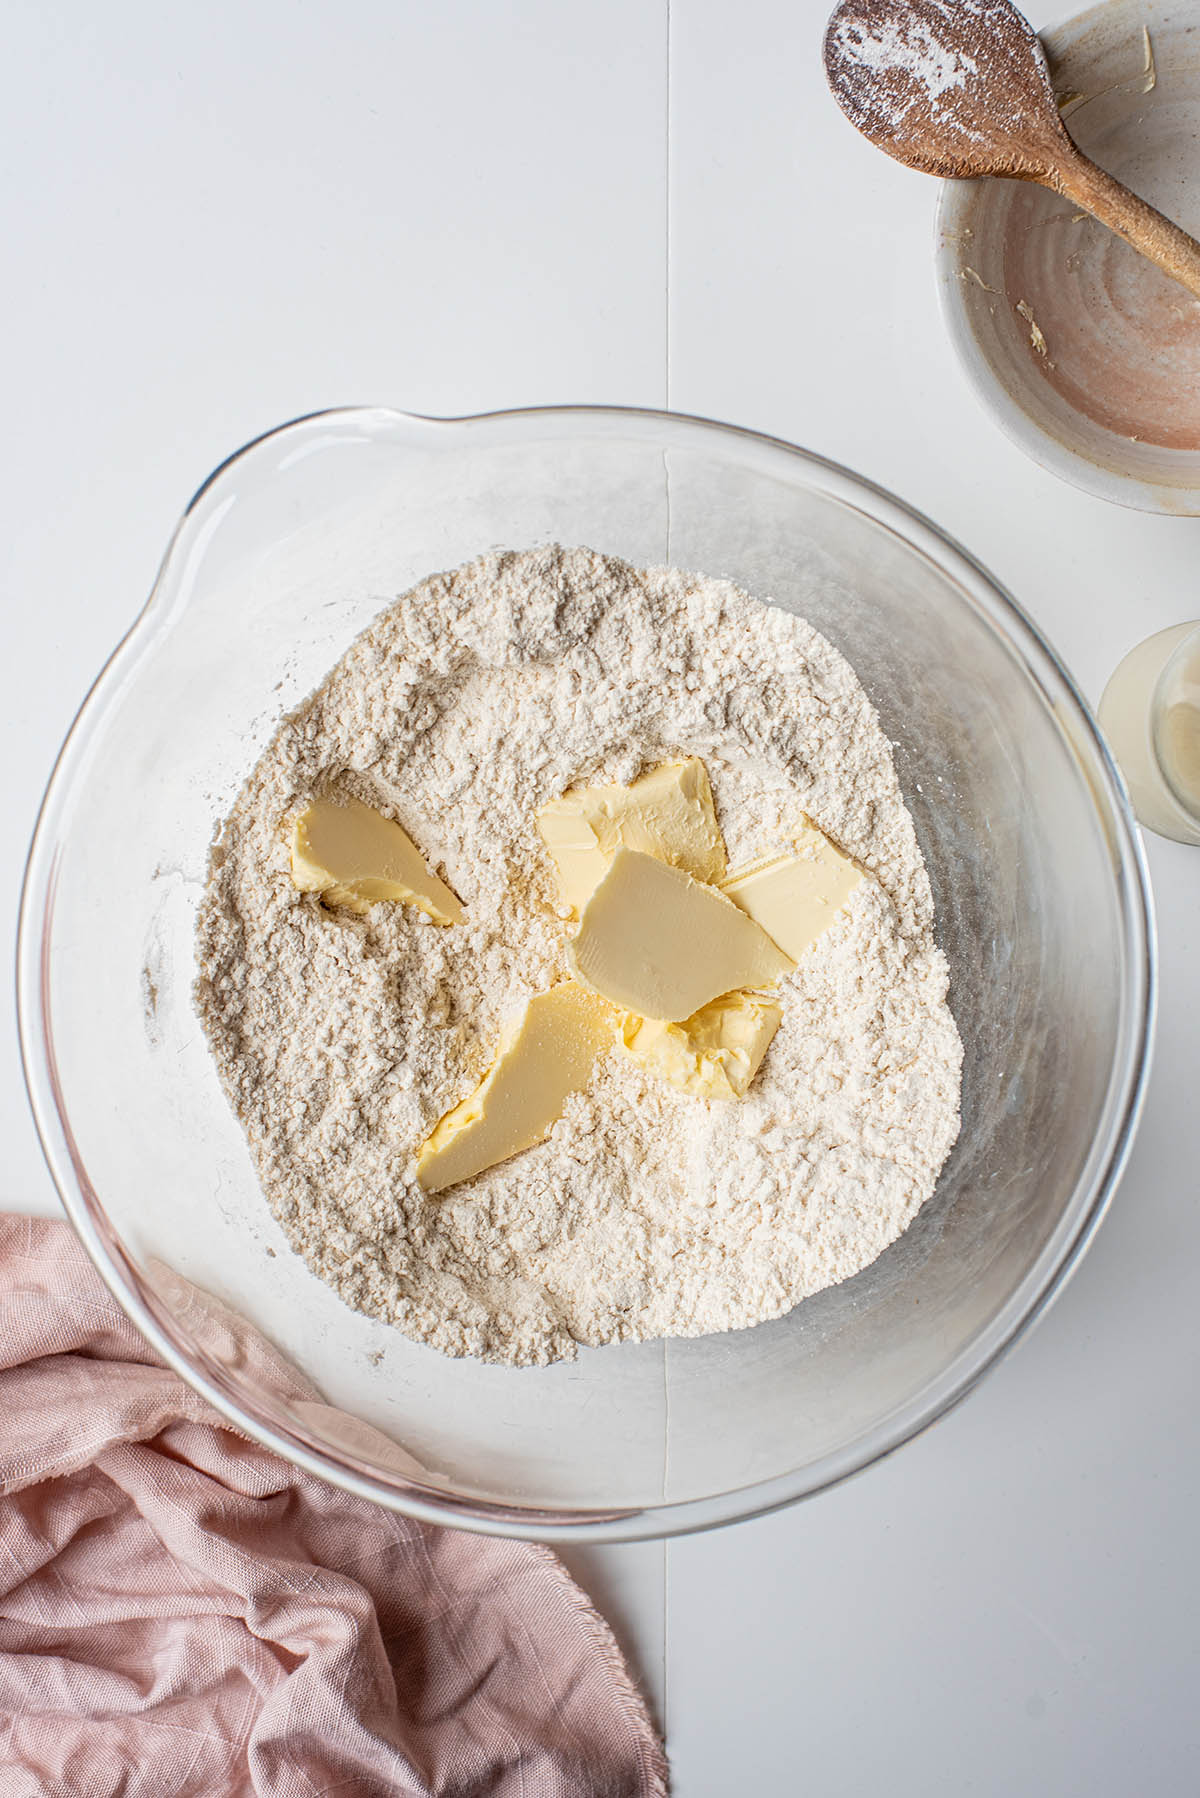 Chunks of vegan butter added to dry ingredients.